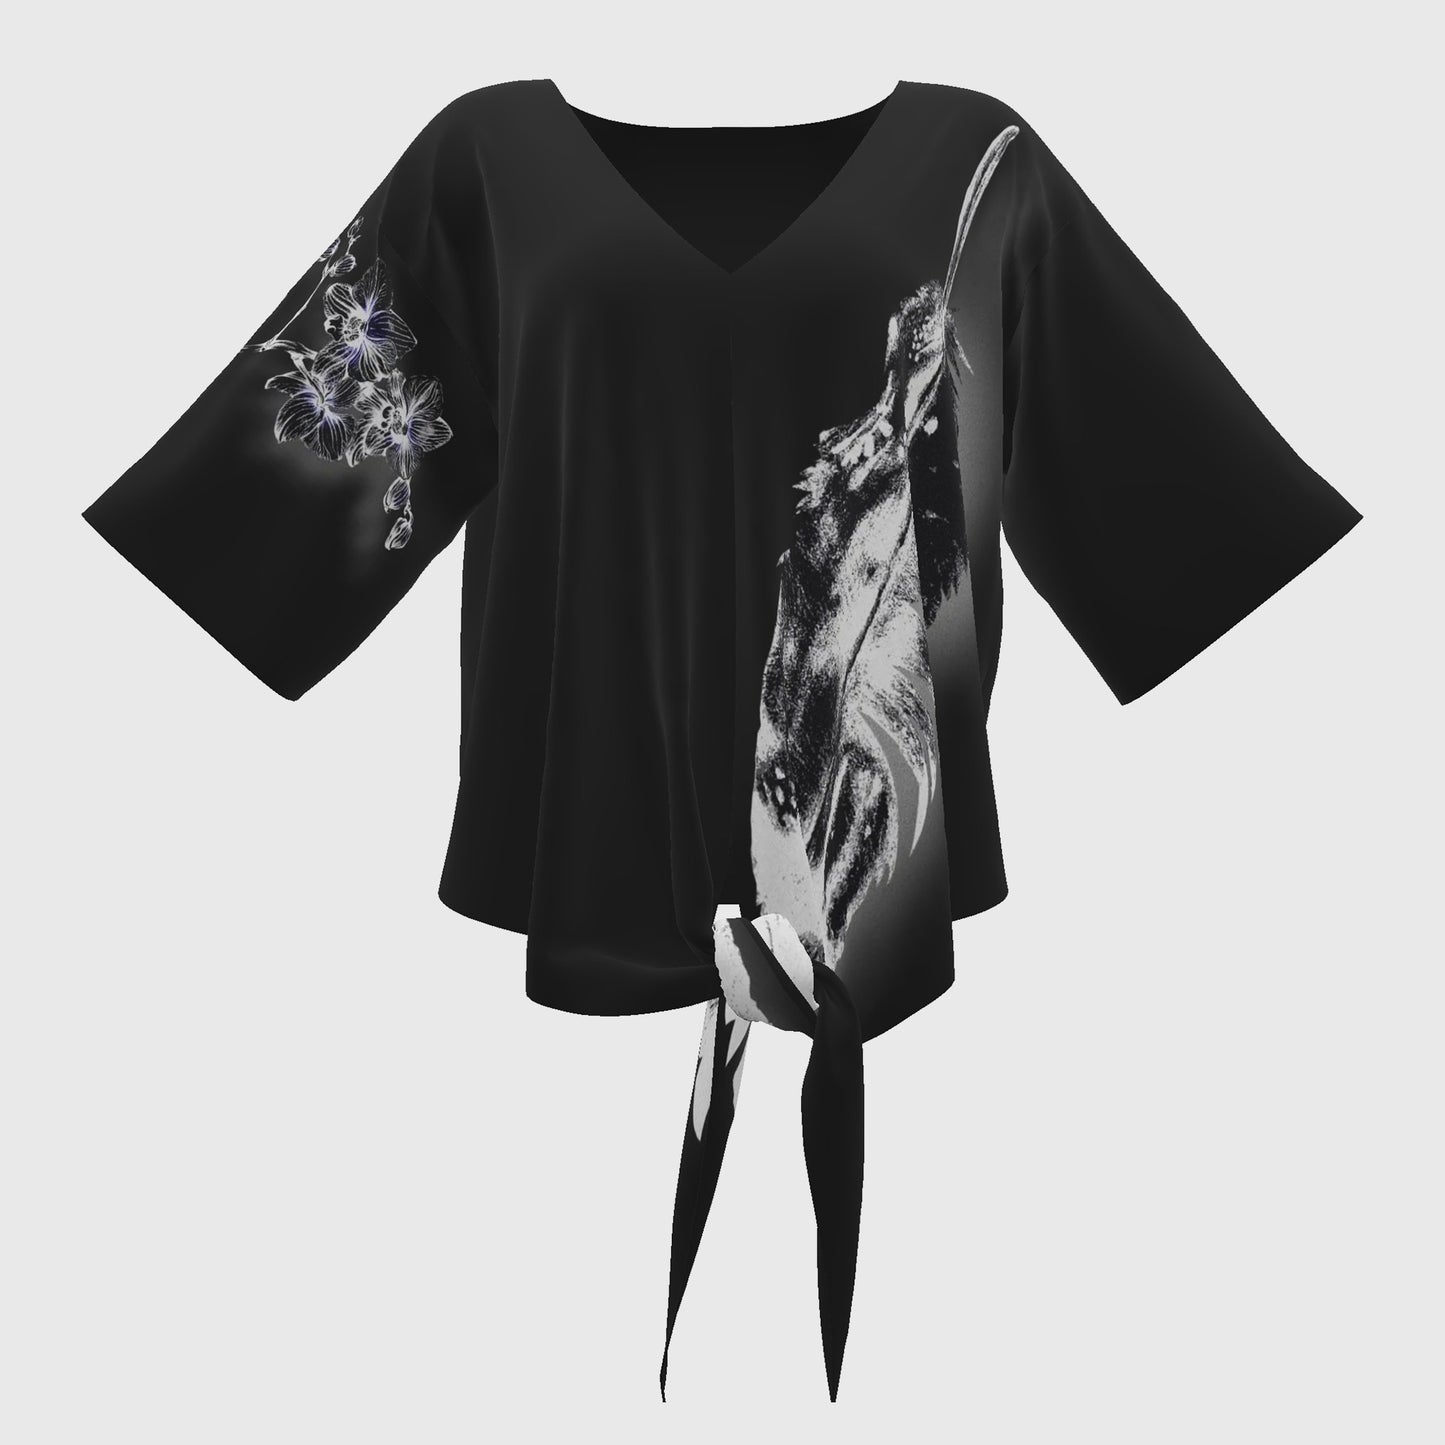 inverted*grey*deep*grey*indigenous*native*american*eagle*feather*orchid*knot*blouse*women's